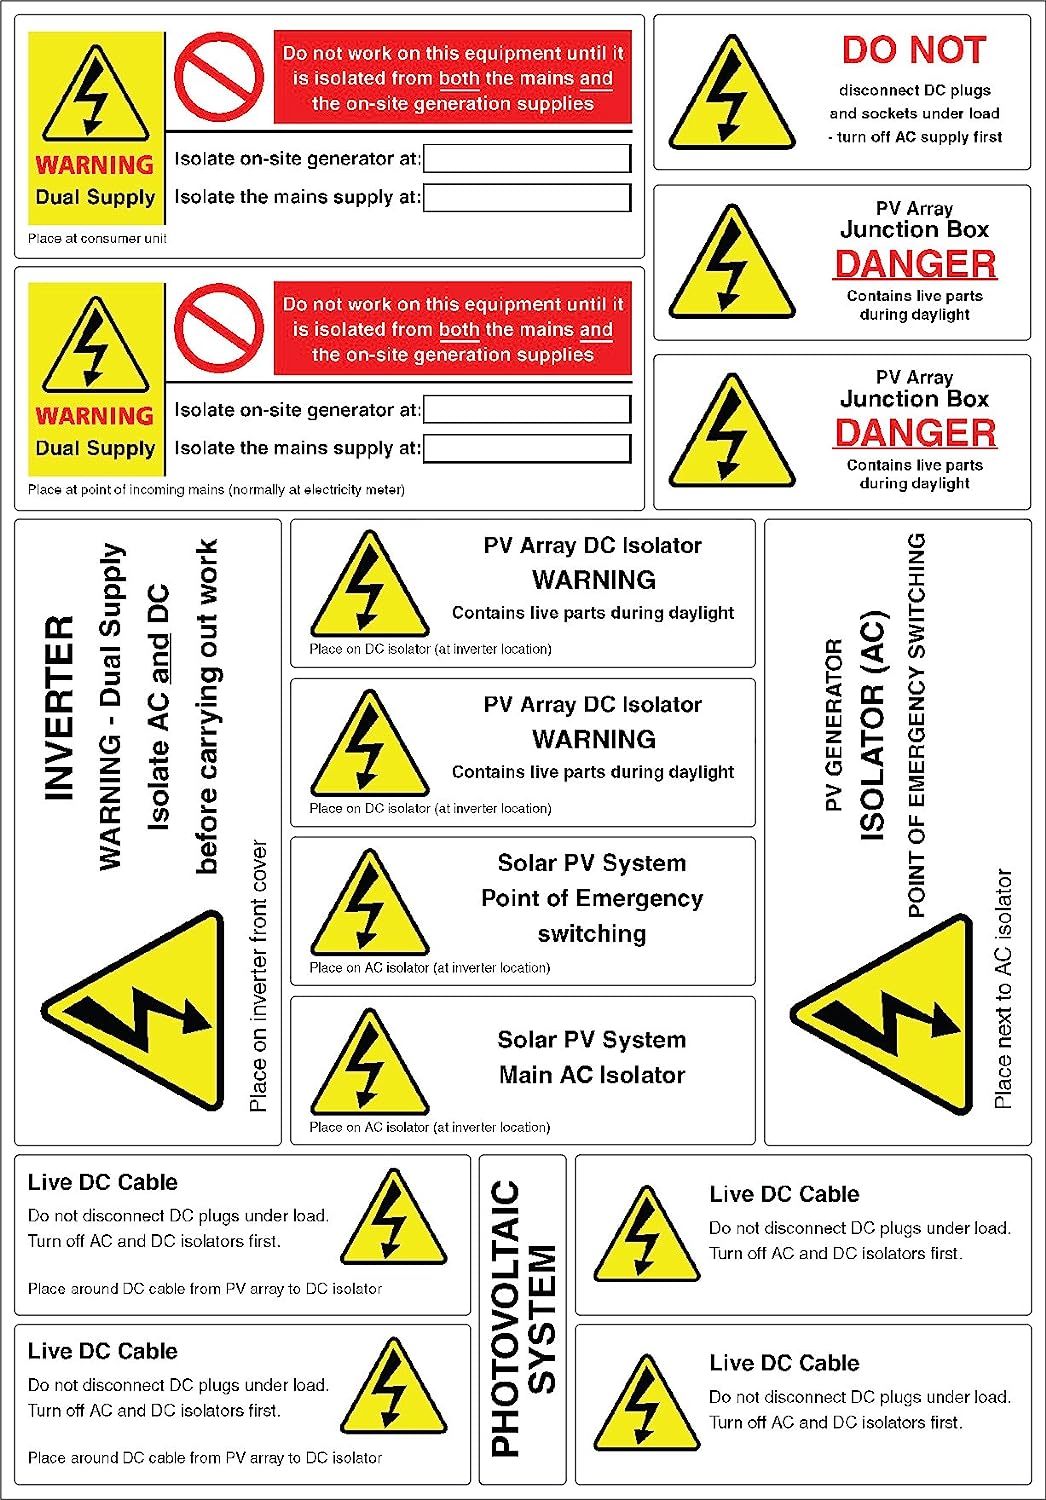 PV on Roof and Hazard Labels Pack